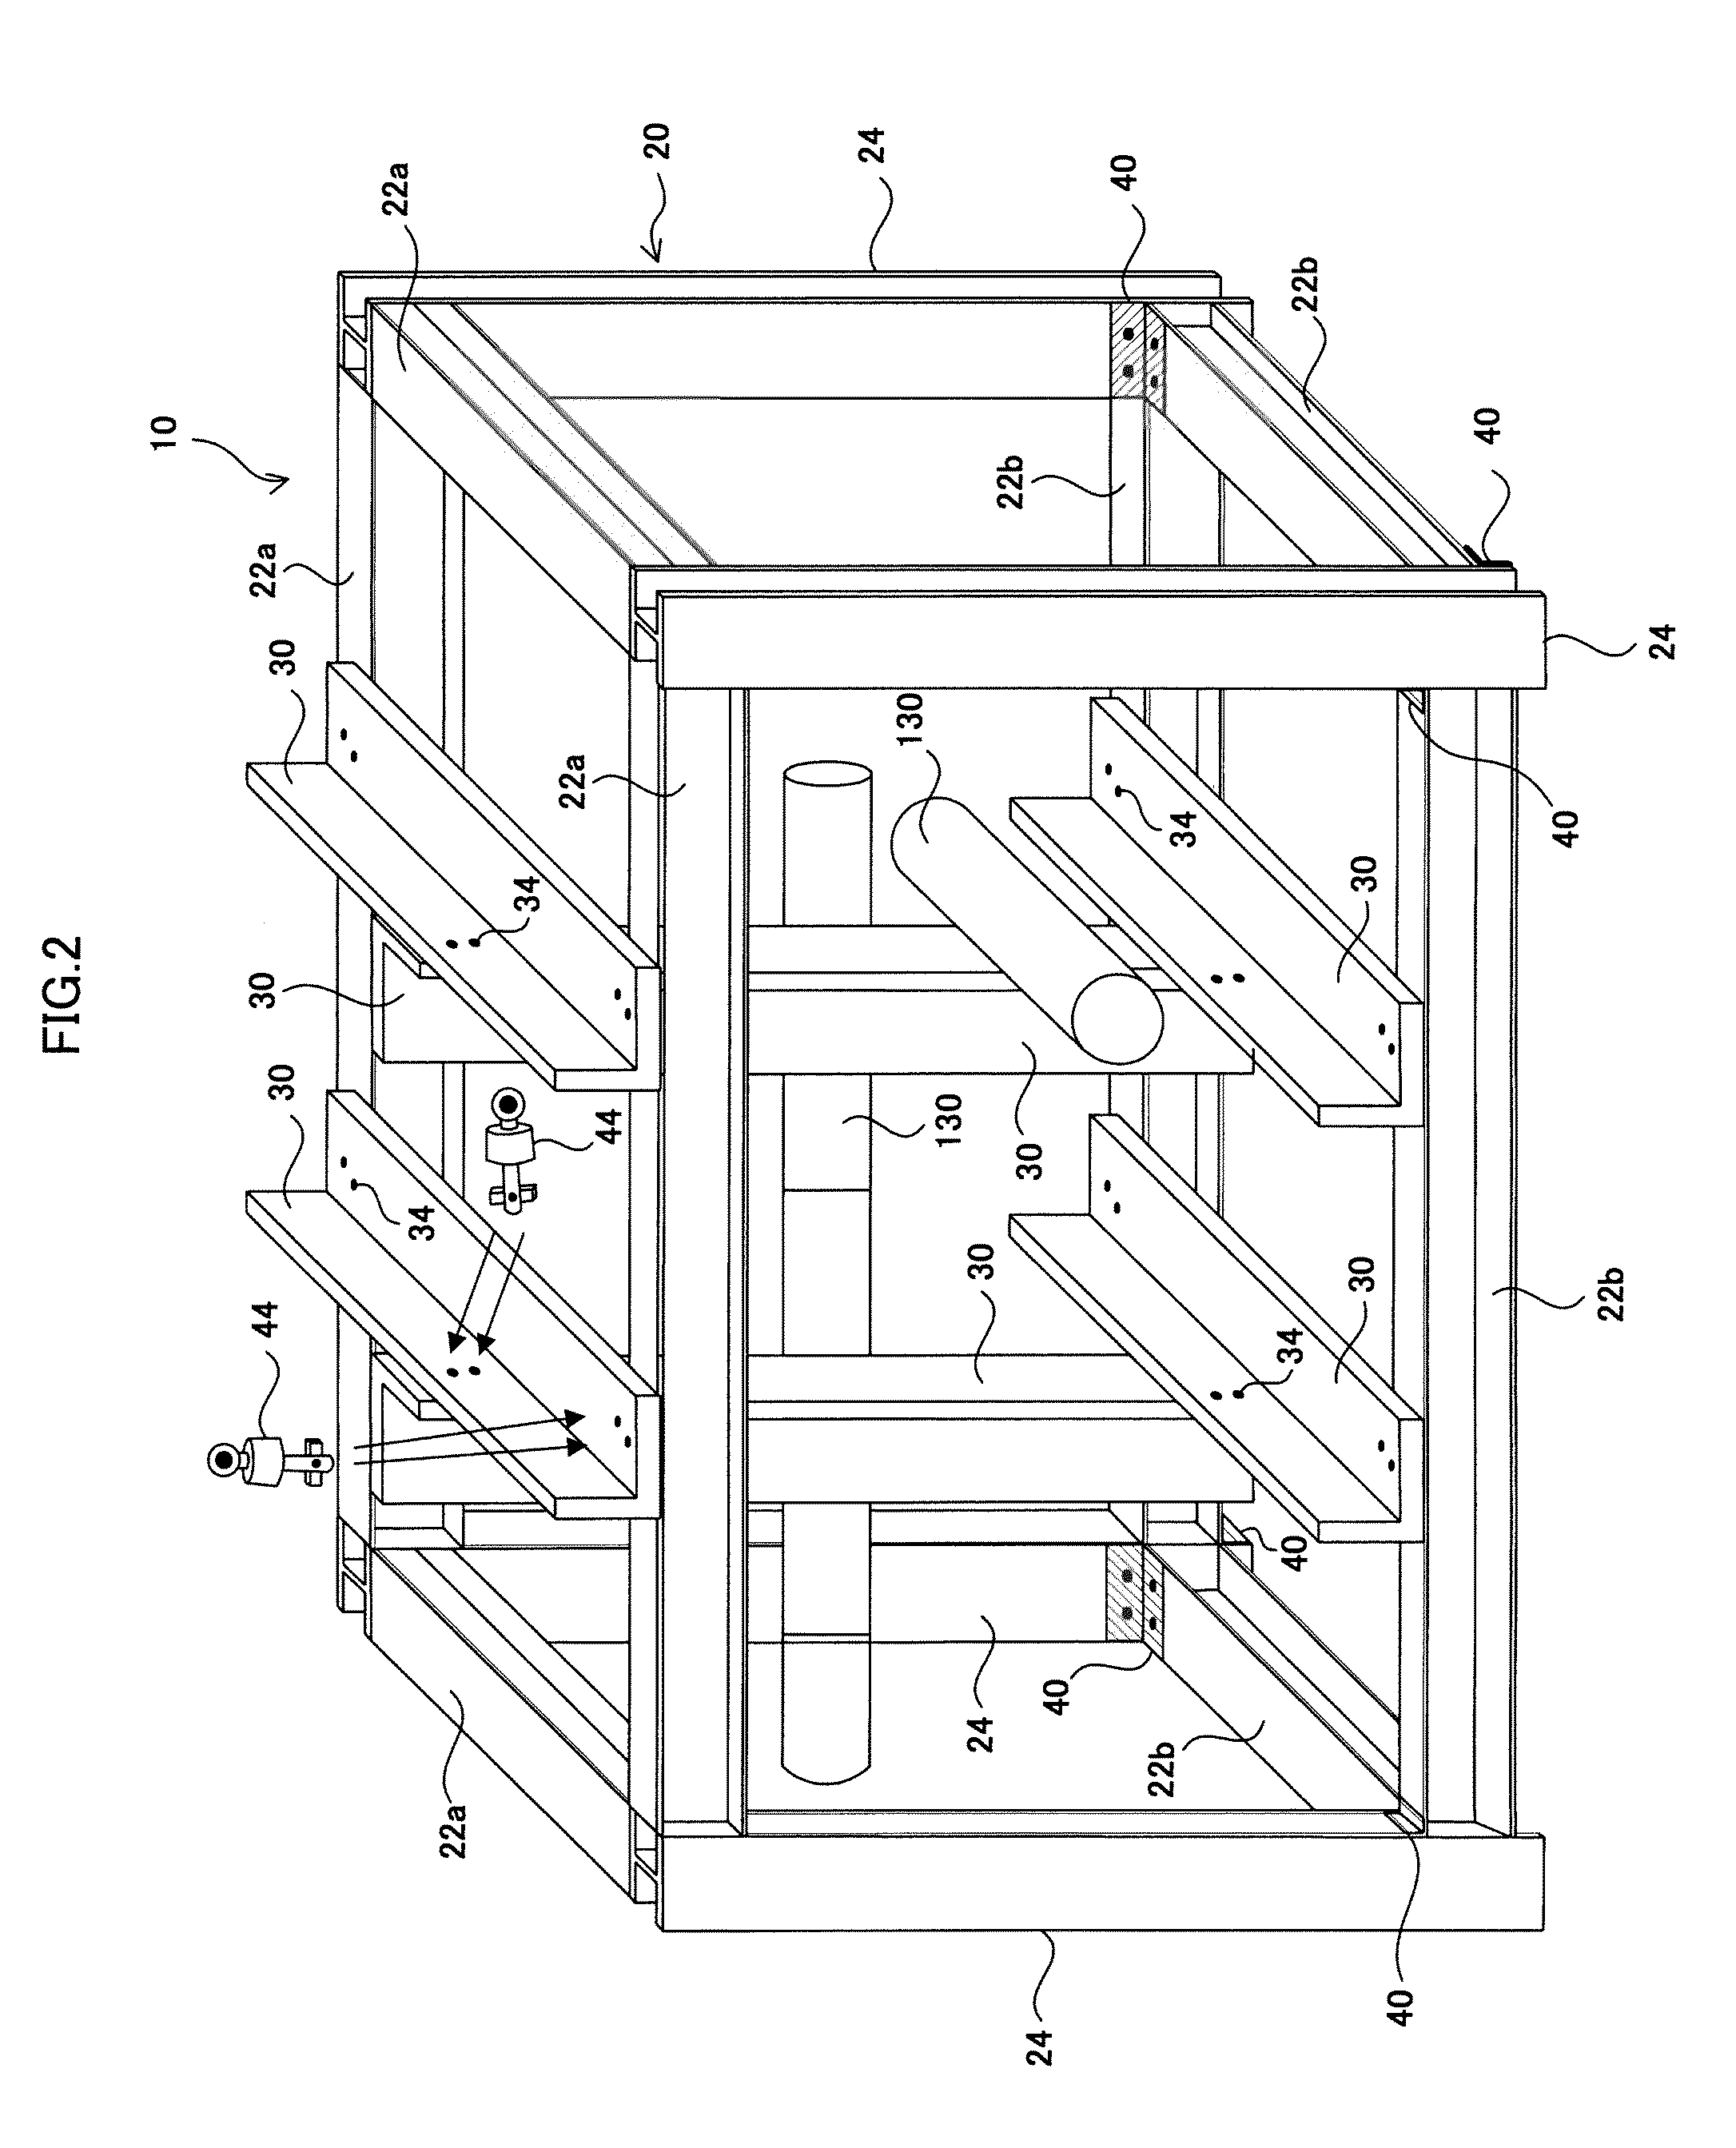 Module structure and plant construction method